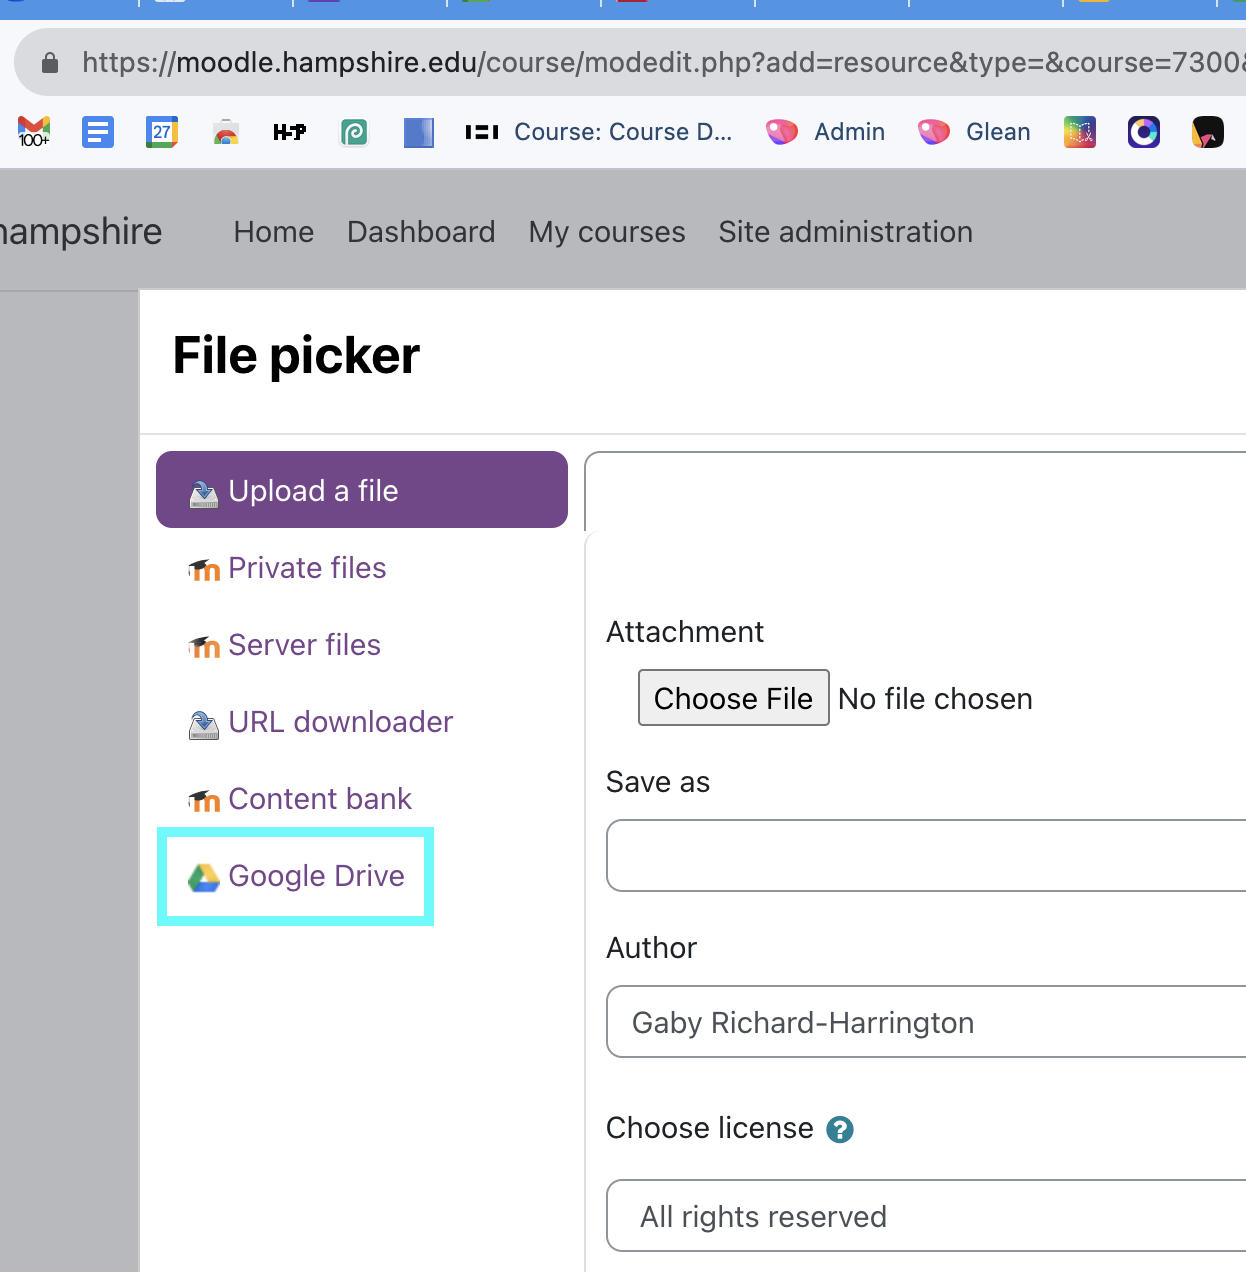 file picker with upload a file, choose file, and upload this file